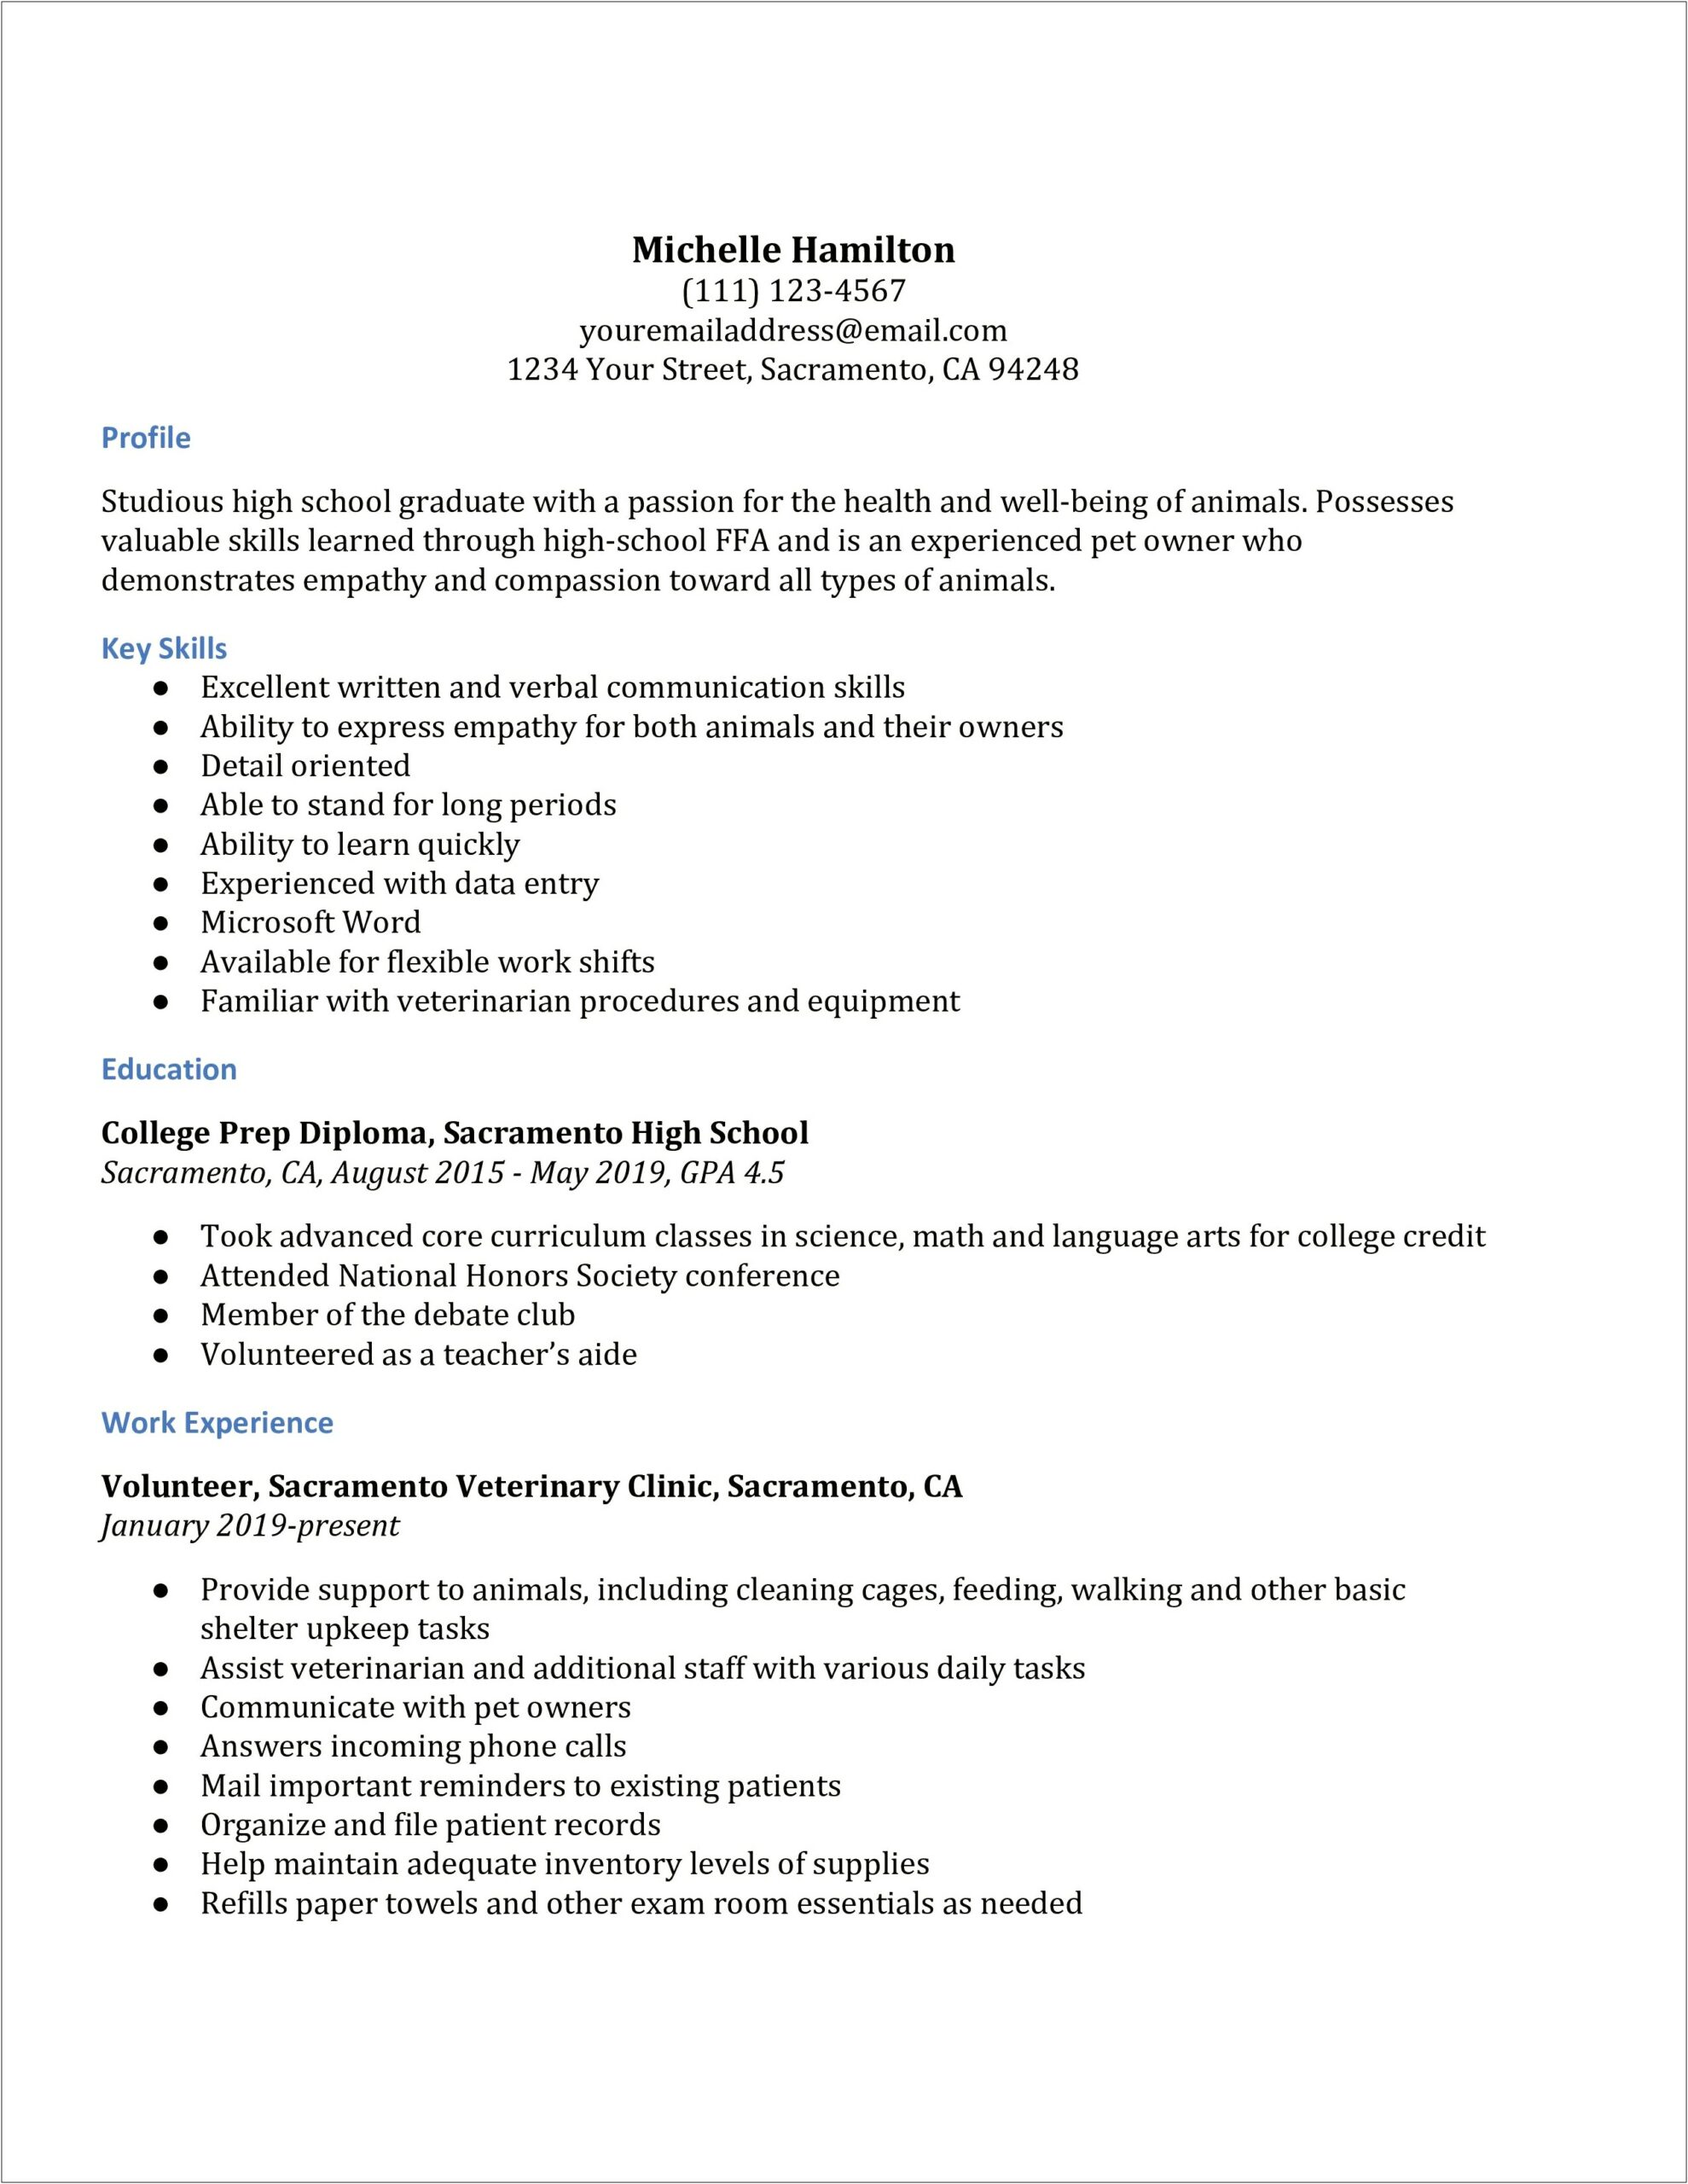 Resume For Highschool Graduate With Experience